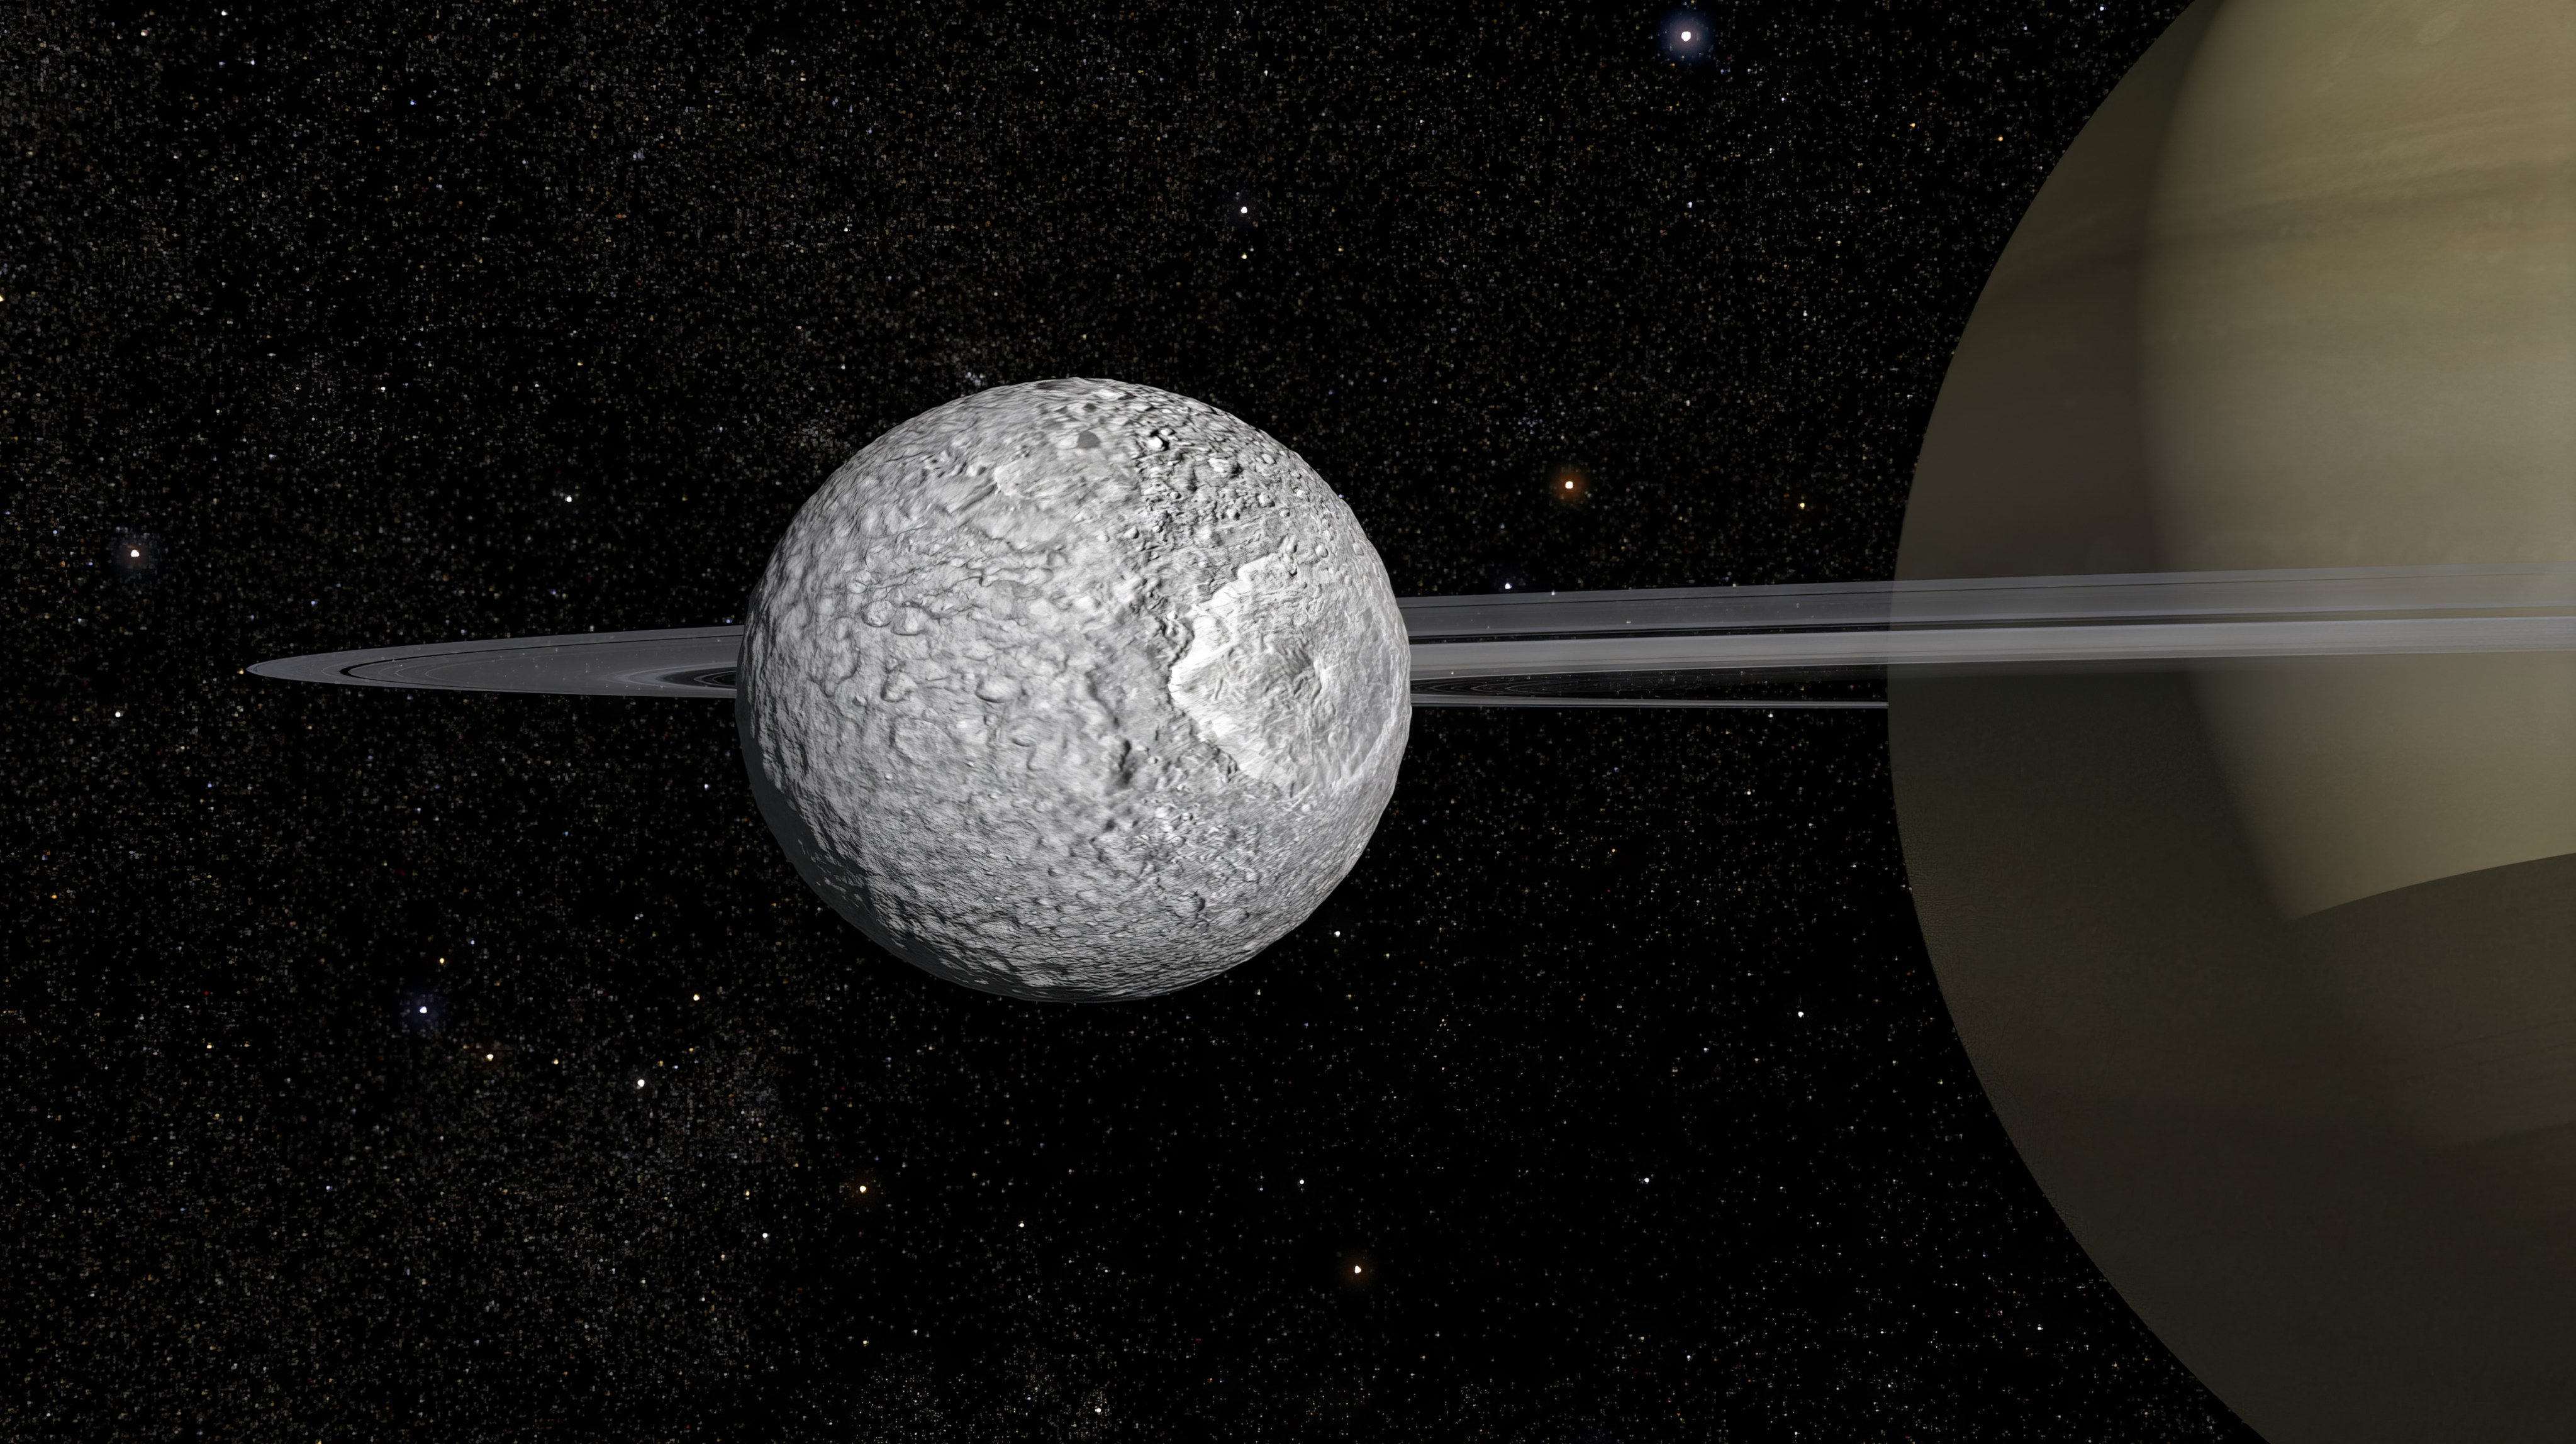 A team of researchers from China and Europe have found a young and evolving body of water beneath the surface of Mimas, the smallest moon in orbit around Saturn. Image: Observatoire de Paris